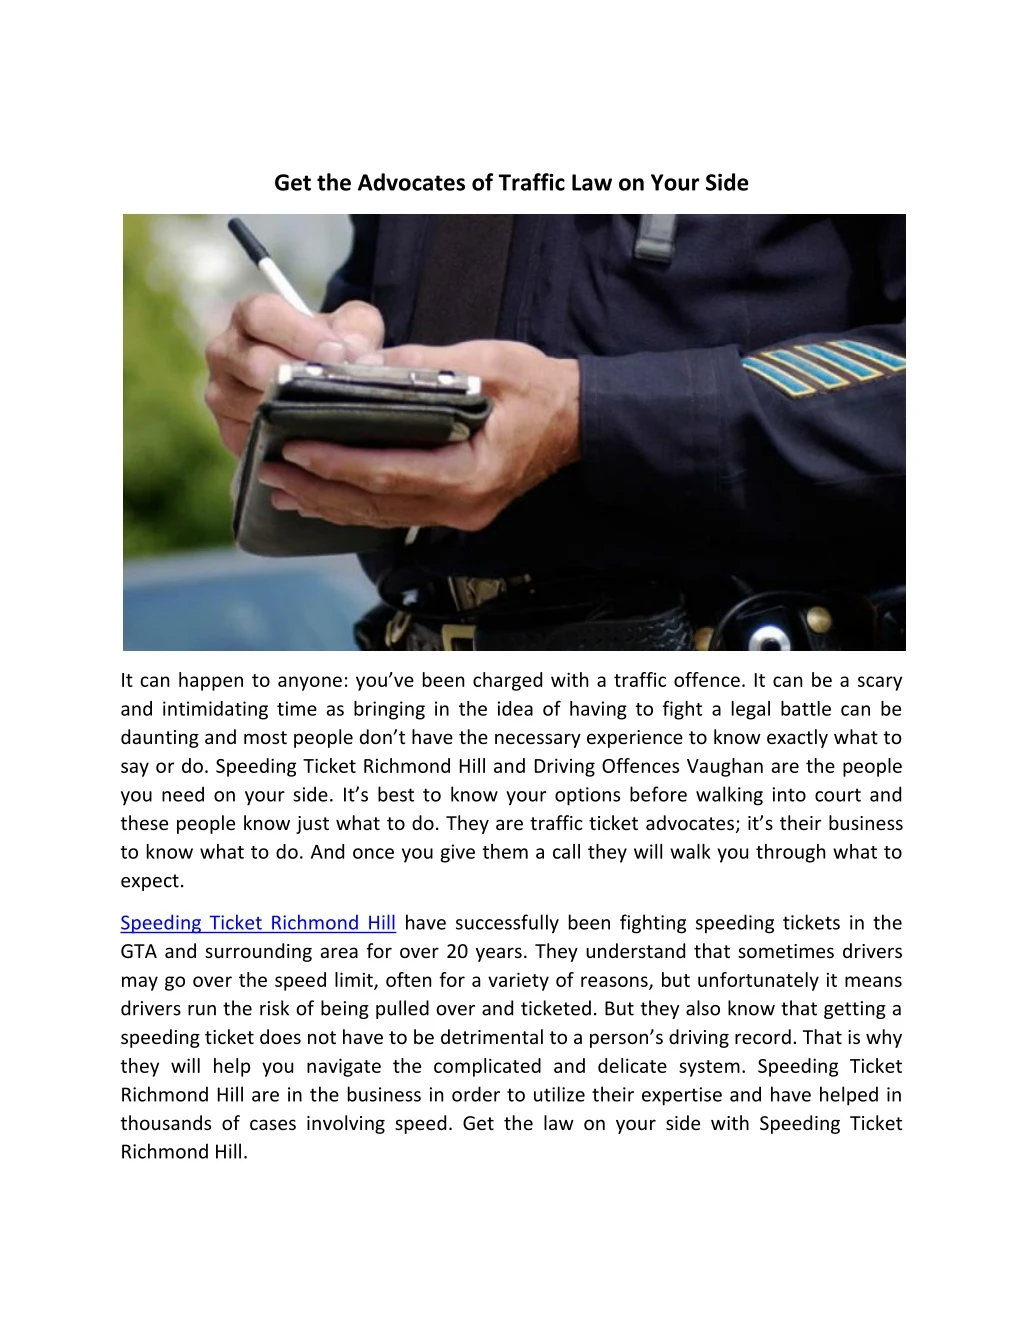 get the advocates of traffic law on your side